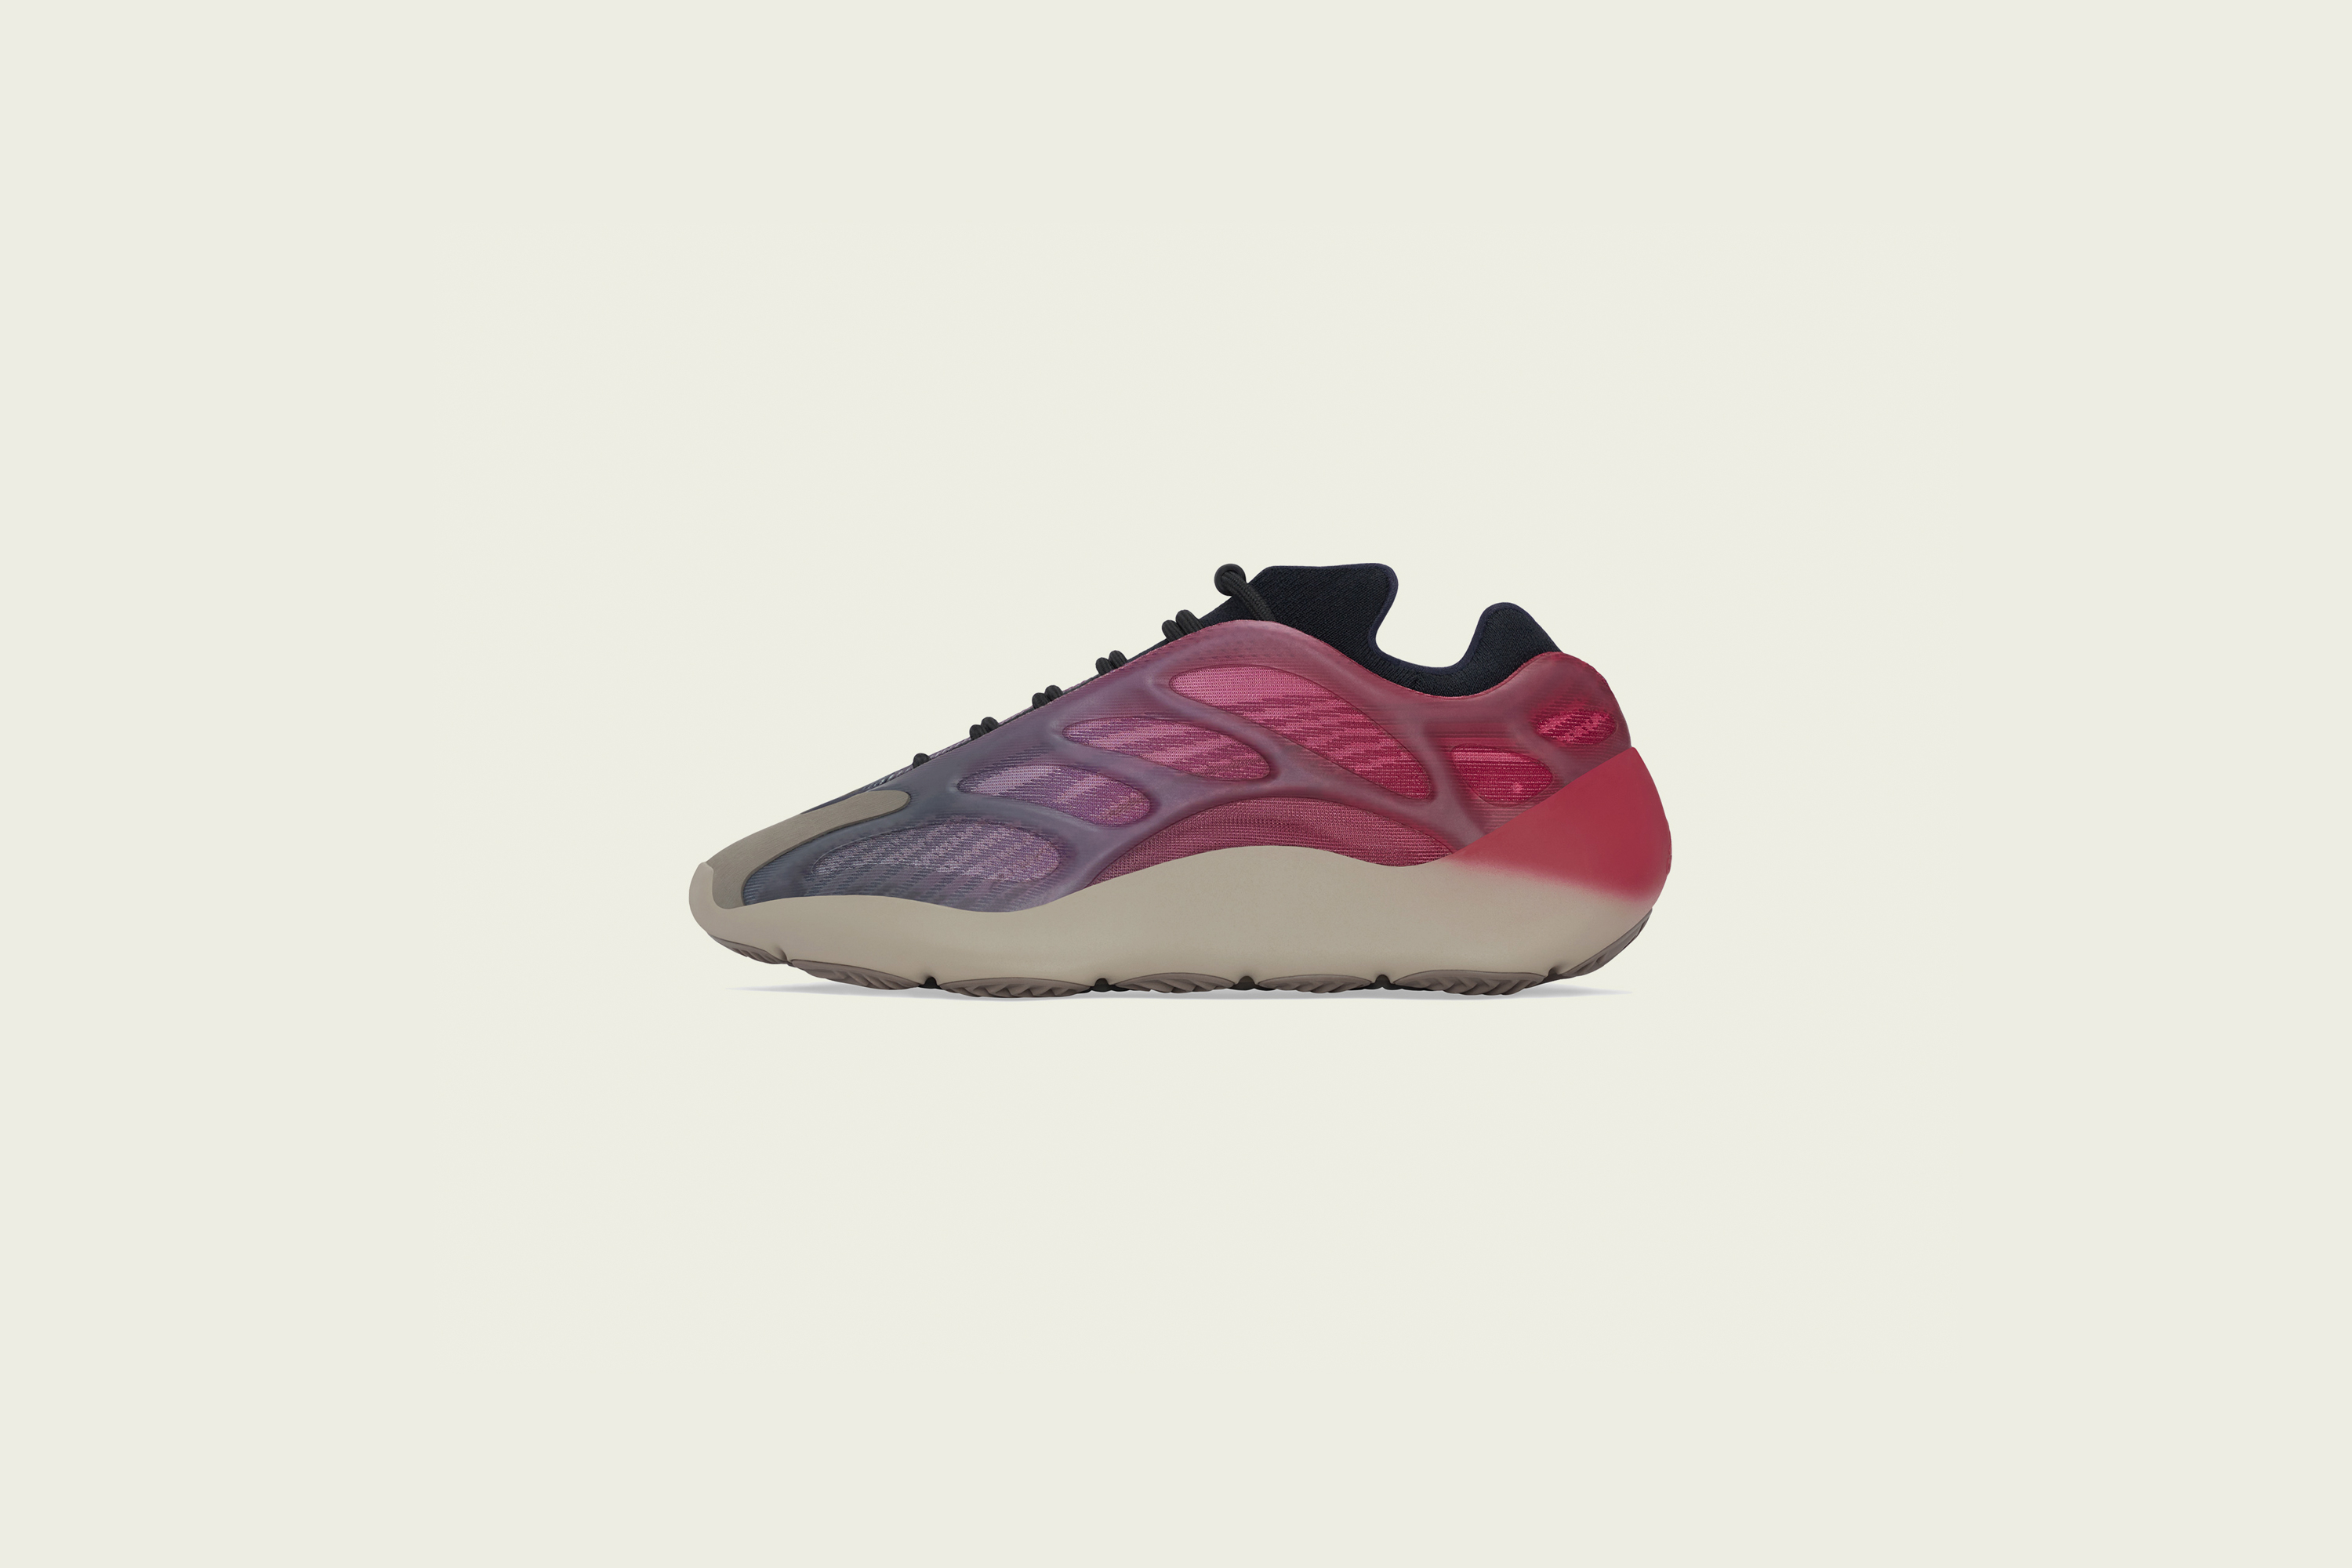 adidas - Yeezy 700v3 - Fade Carbon - Up There